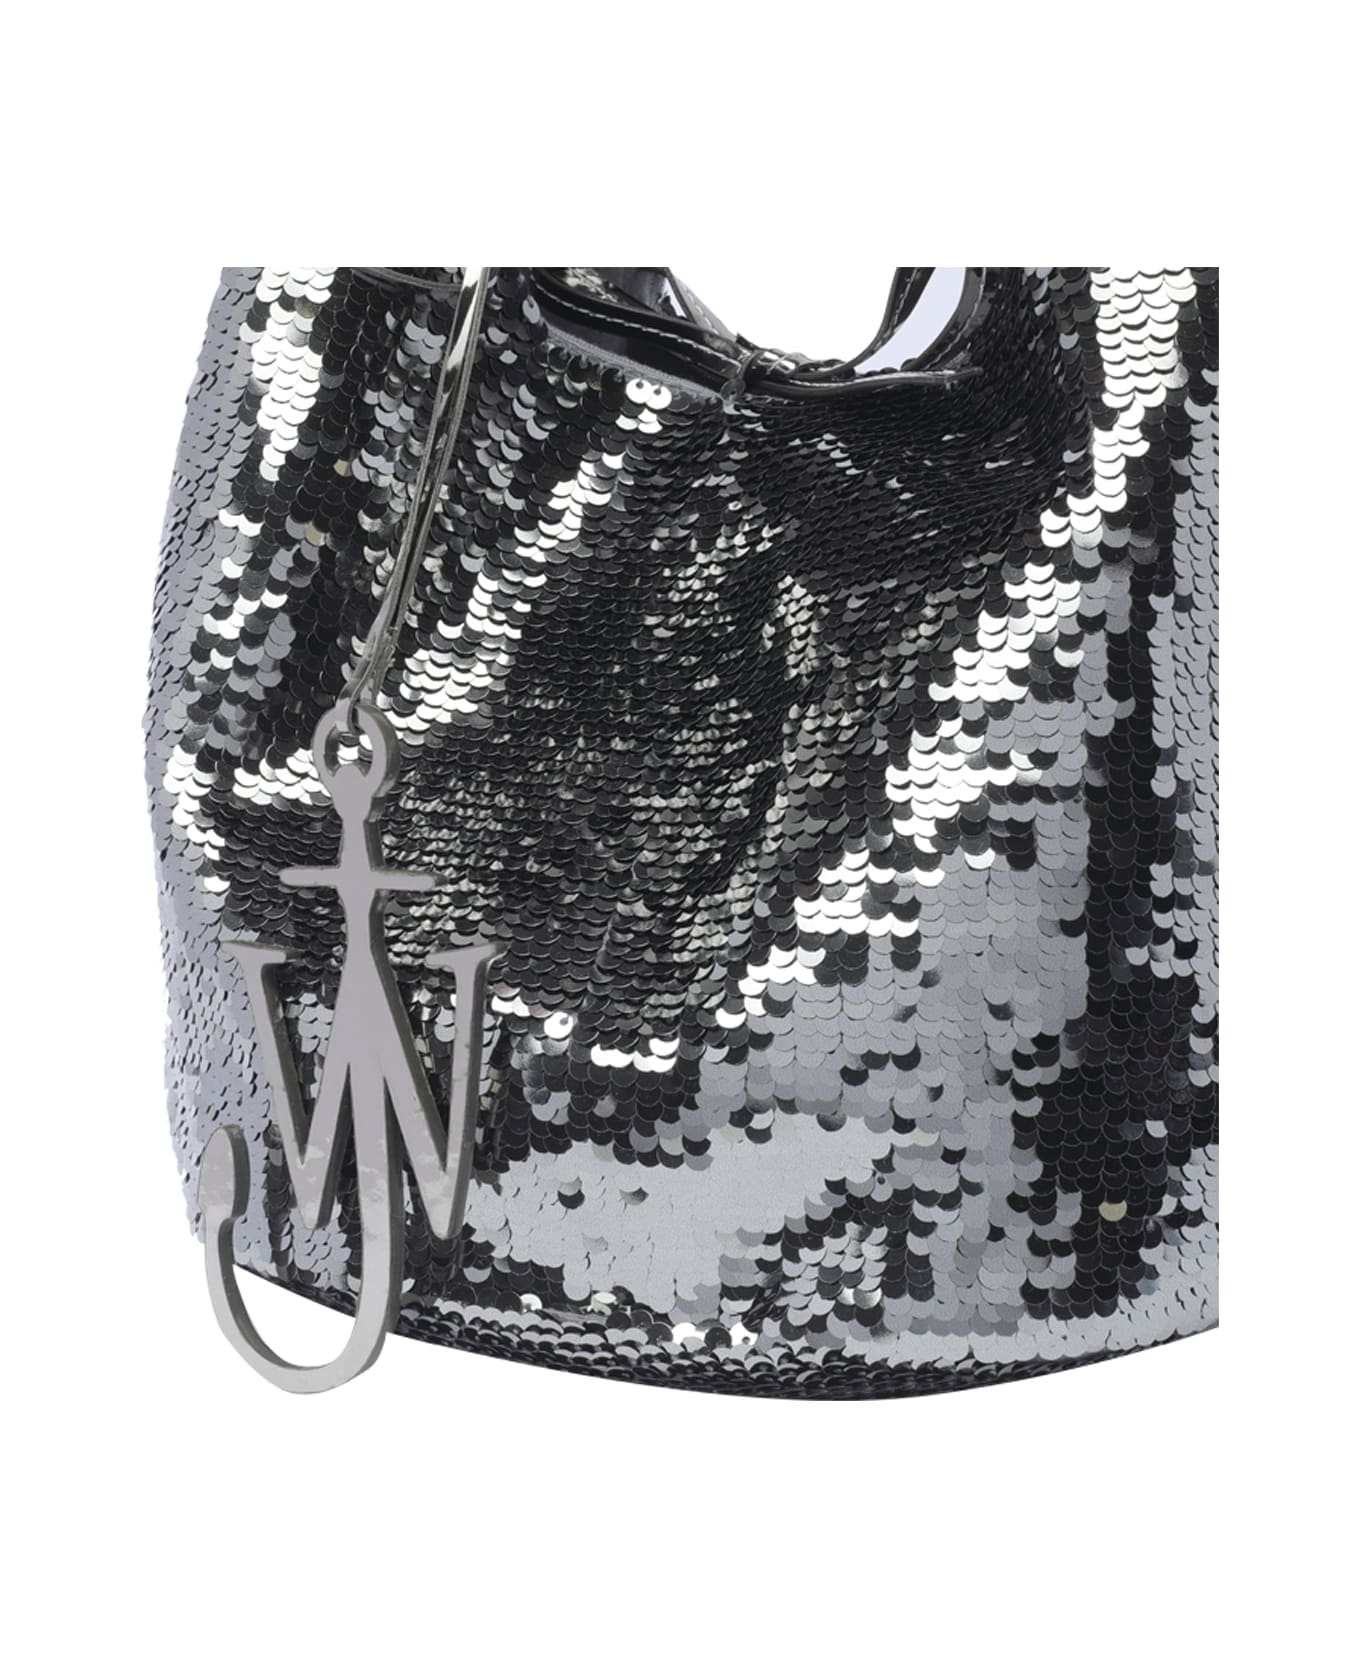 J.W. Anderson Mini Sequins Shopping Bag - Charcoal